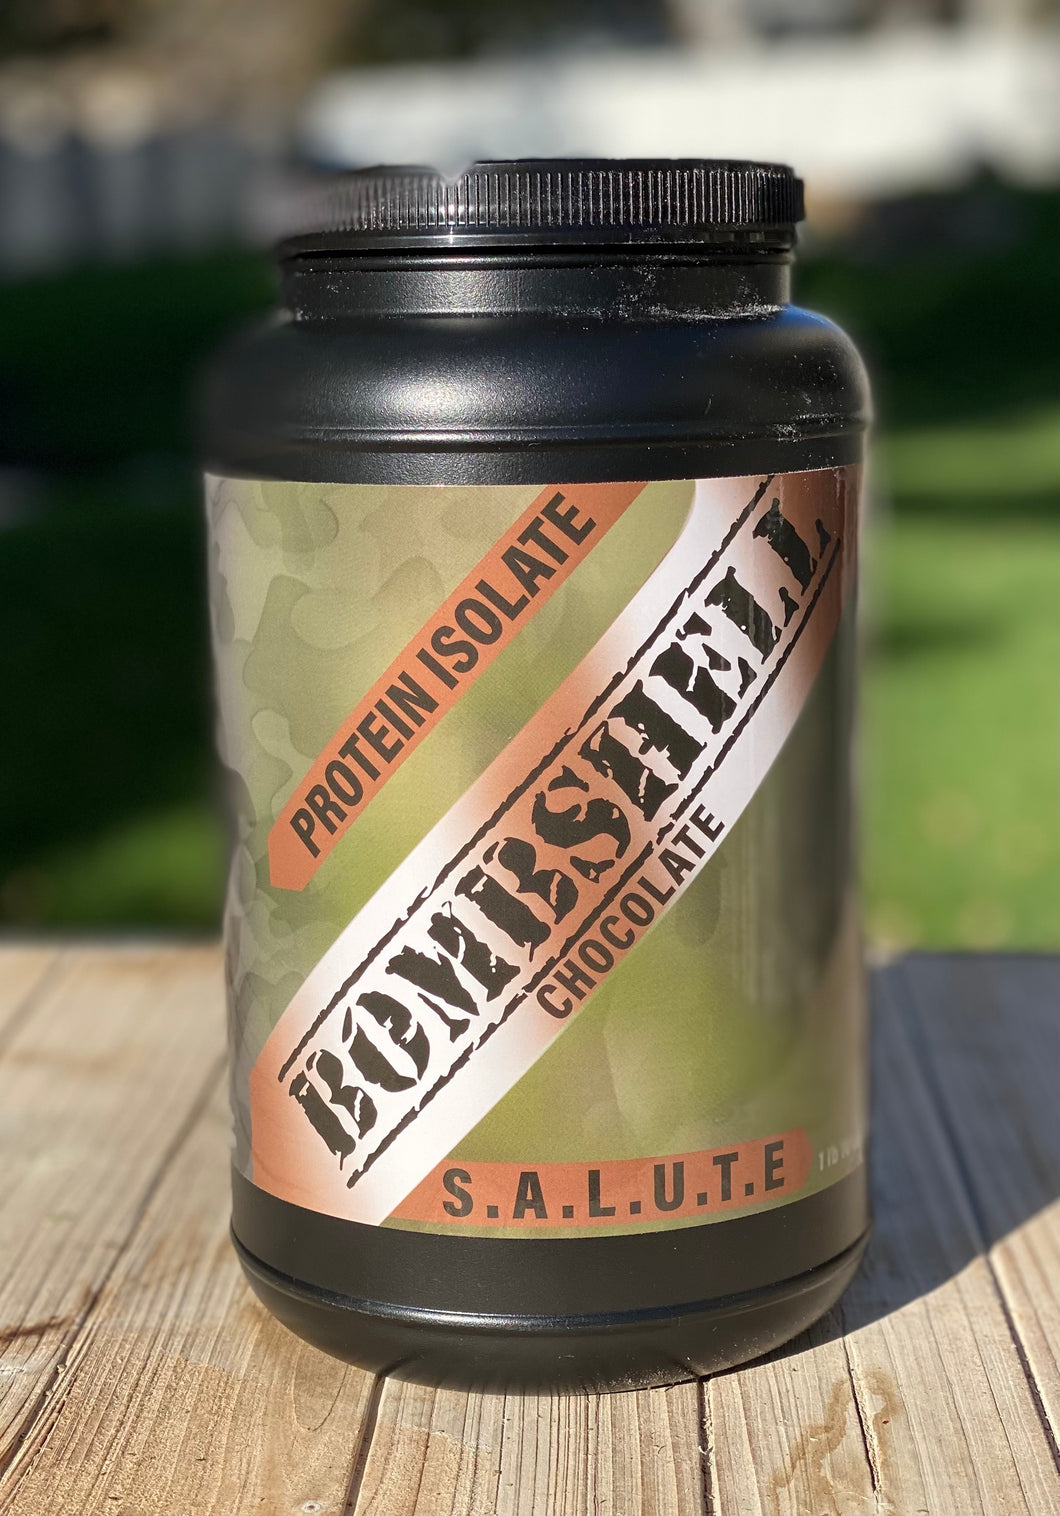 S.A.L.U.T.E. Bombshell Protein Isolate